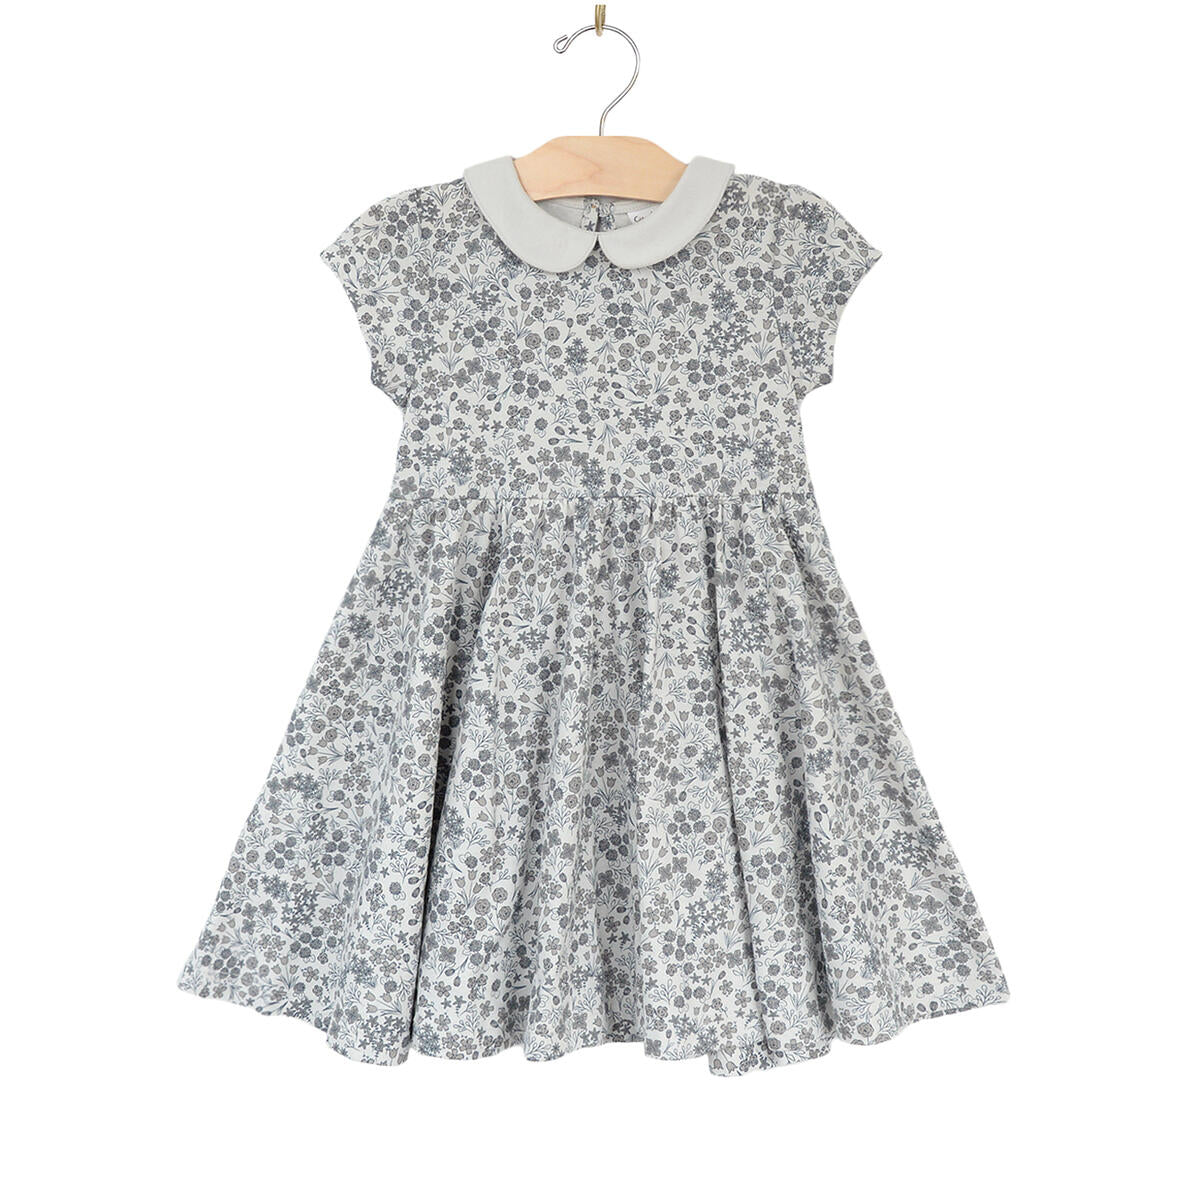 City Mouse Collar Twirl Dress - Calico floral robins egg